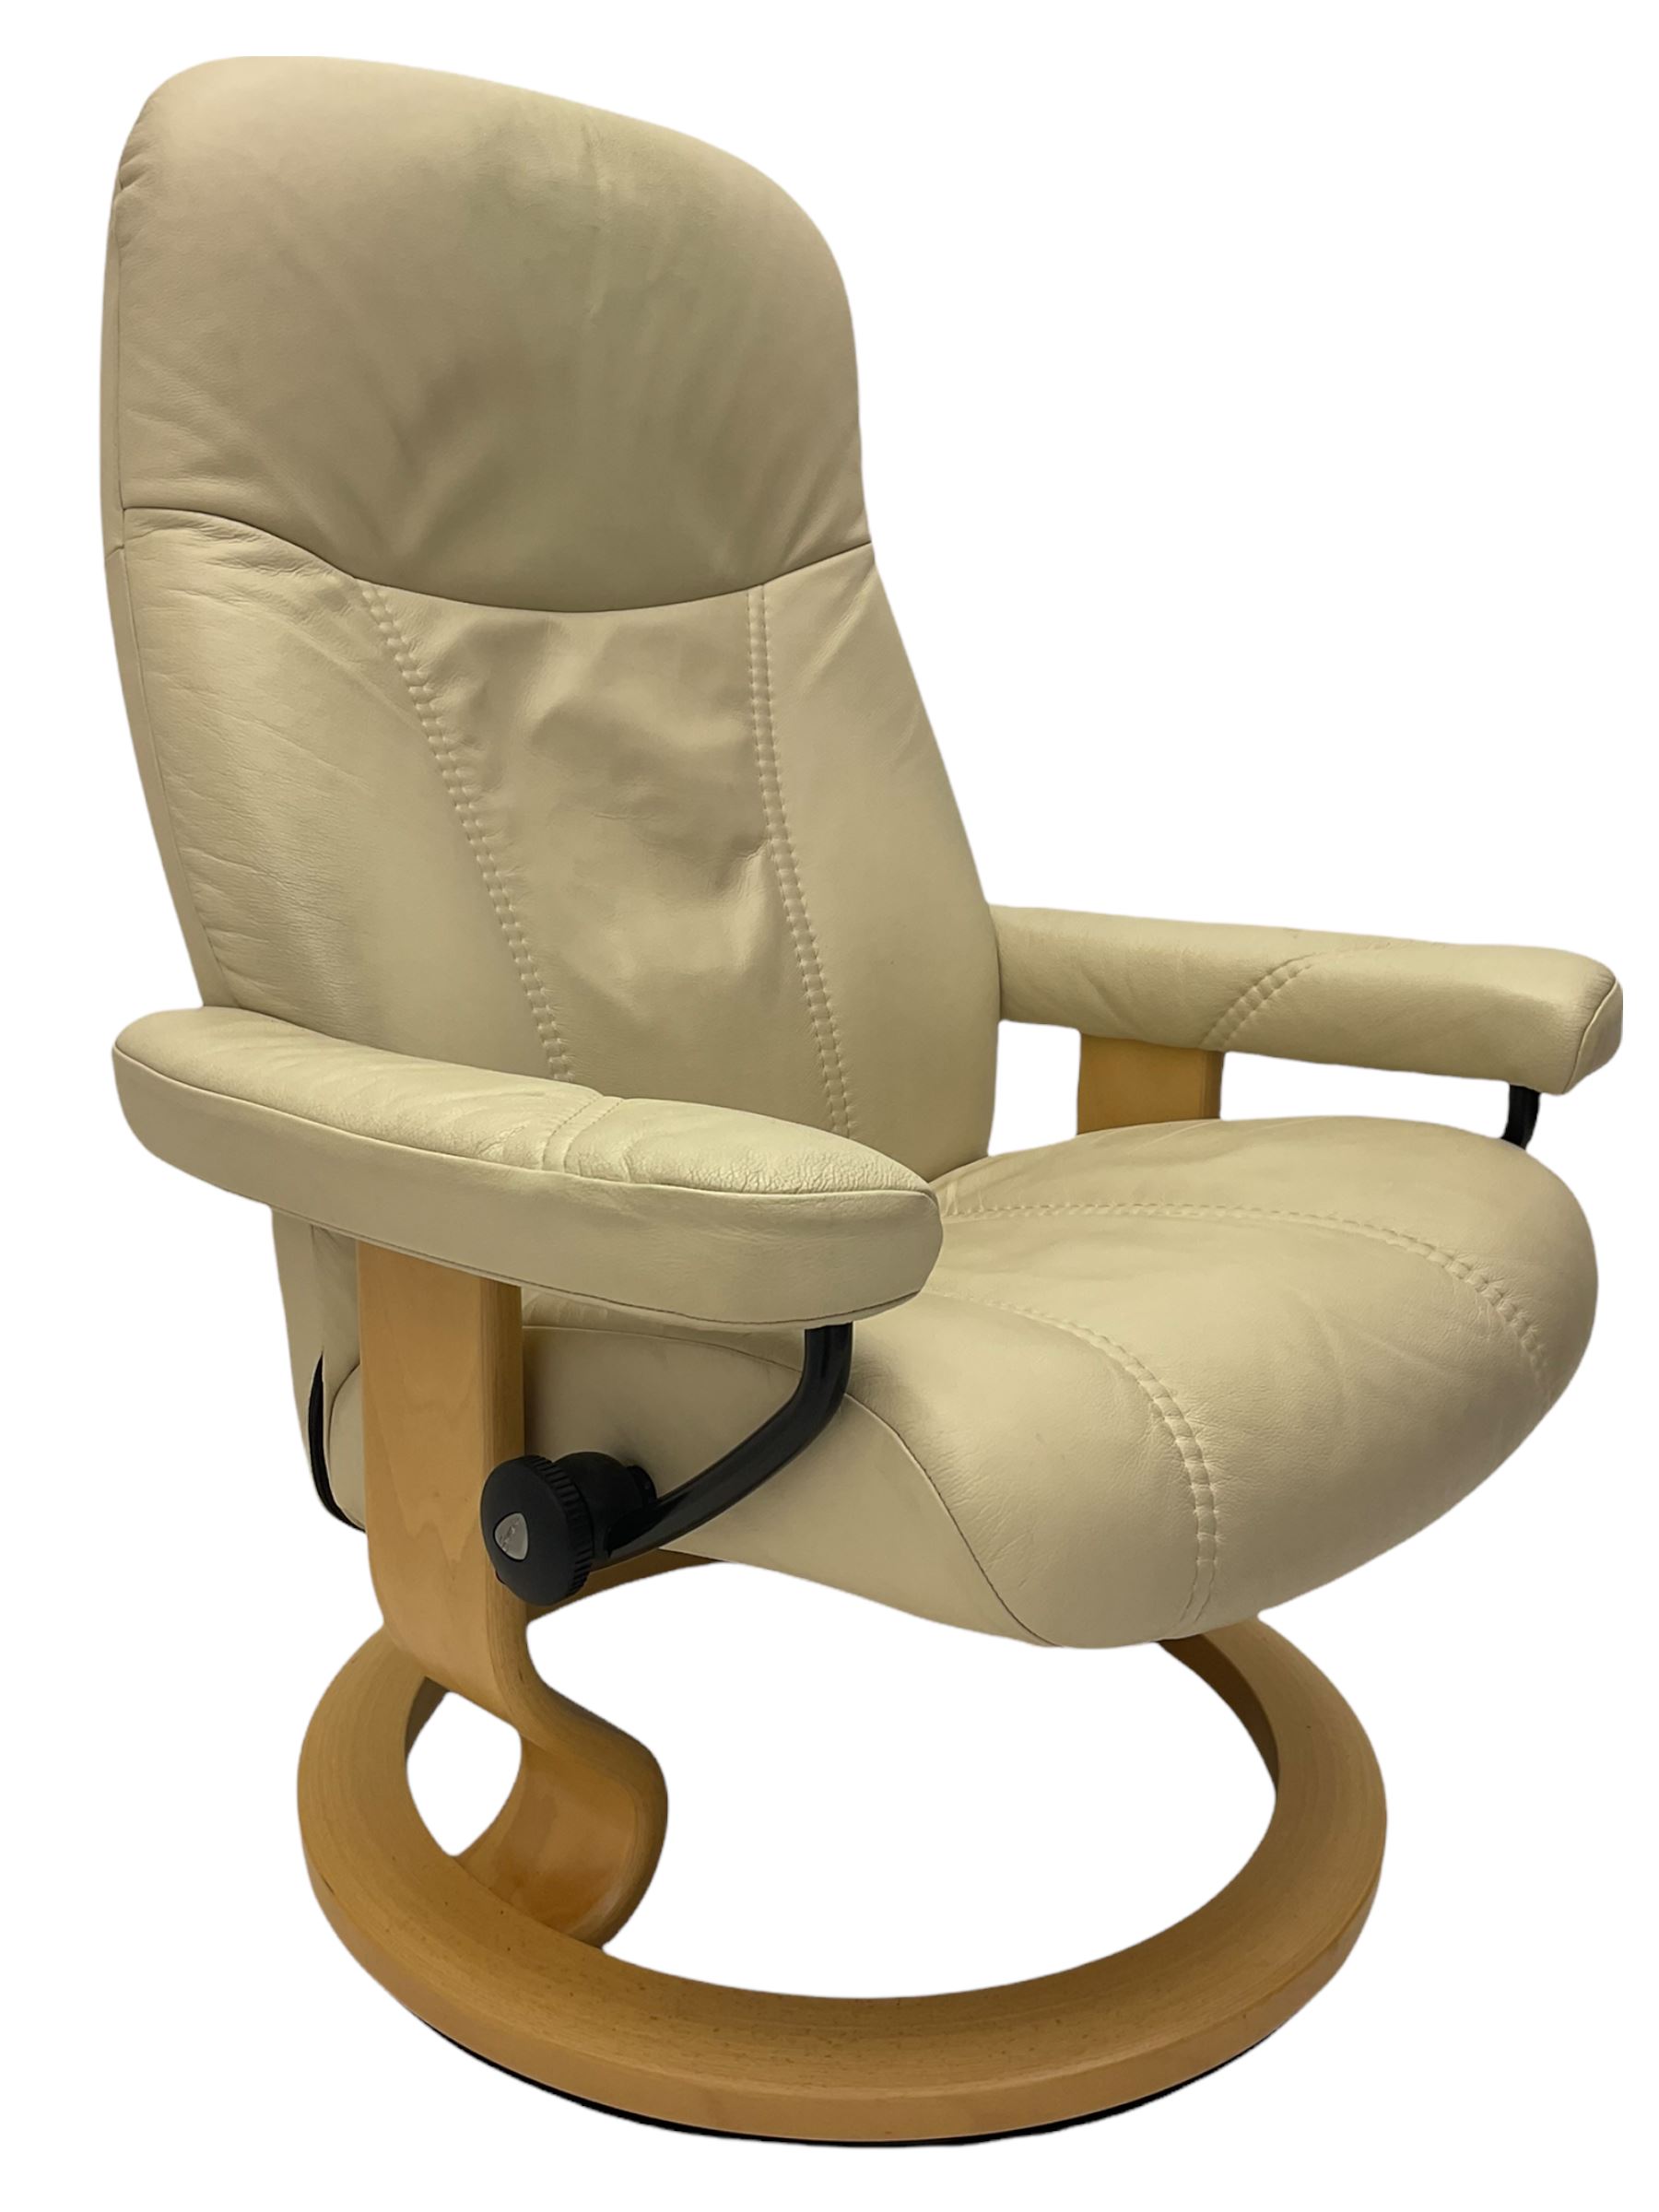 Ekornes - Stressless armchair upholstered in cream leather with matching footstool - Image 10 of 16